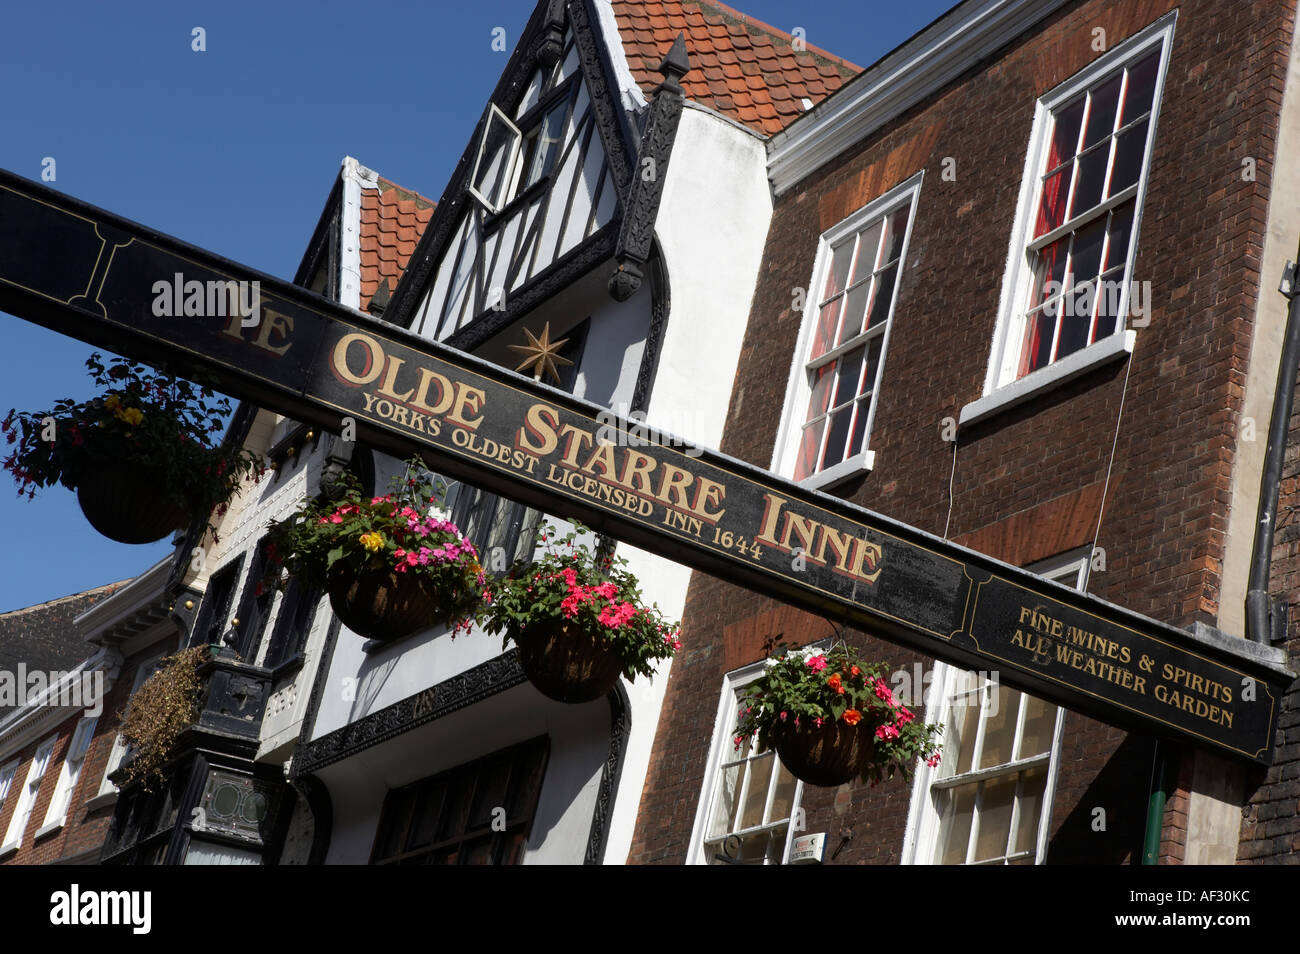 Ye Olde Starre Inne, Stonegate - One Of York's Most Famous And Historic Pubs